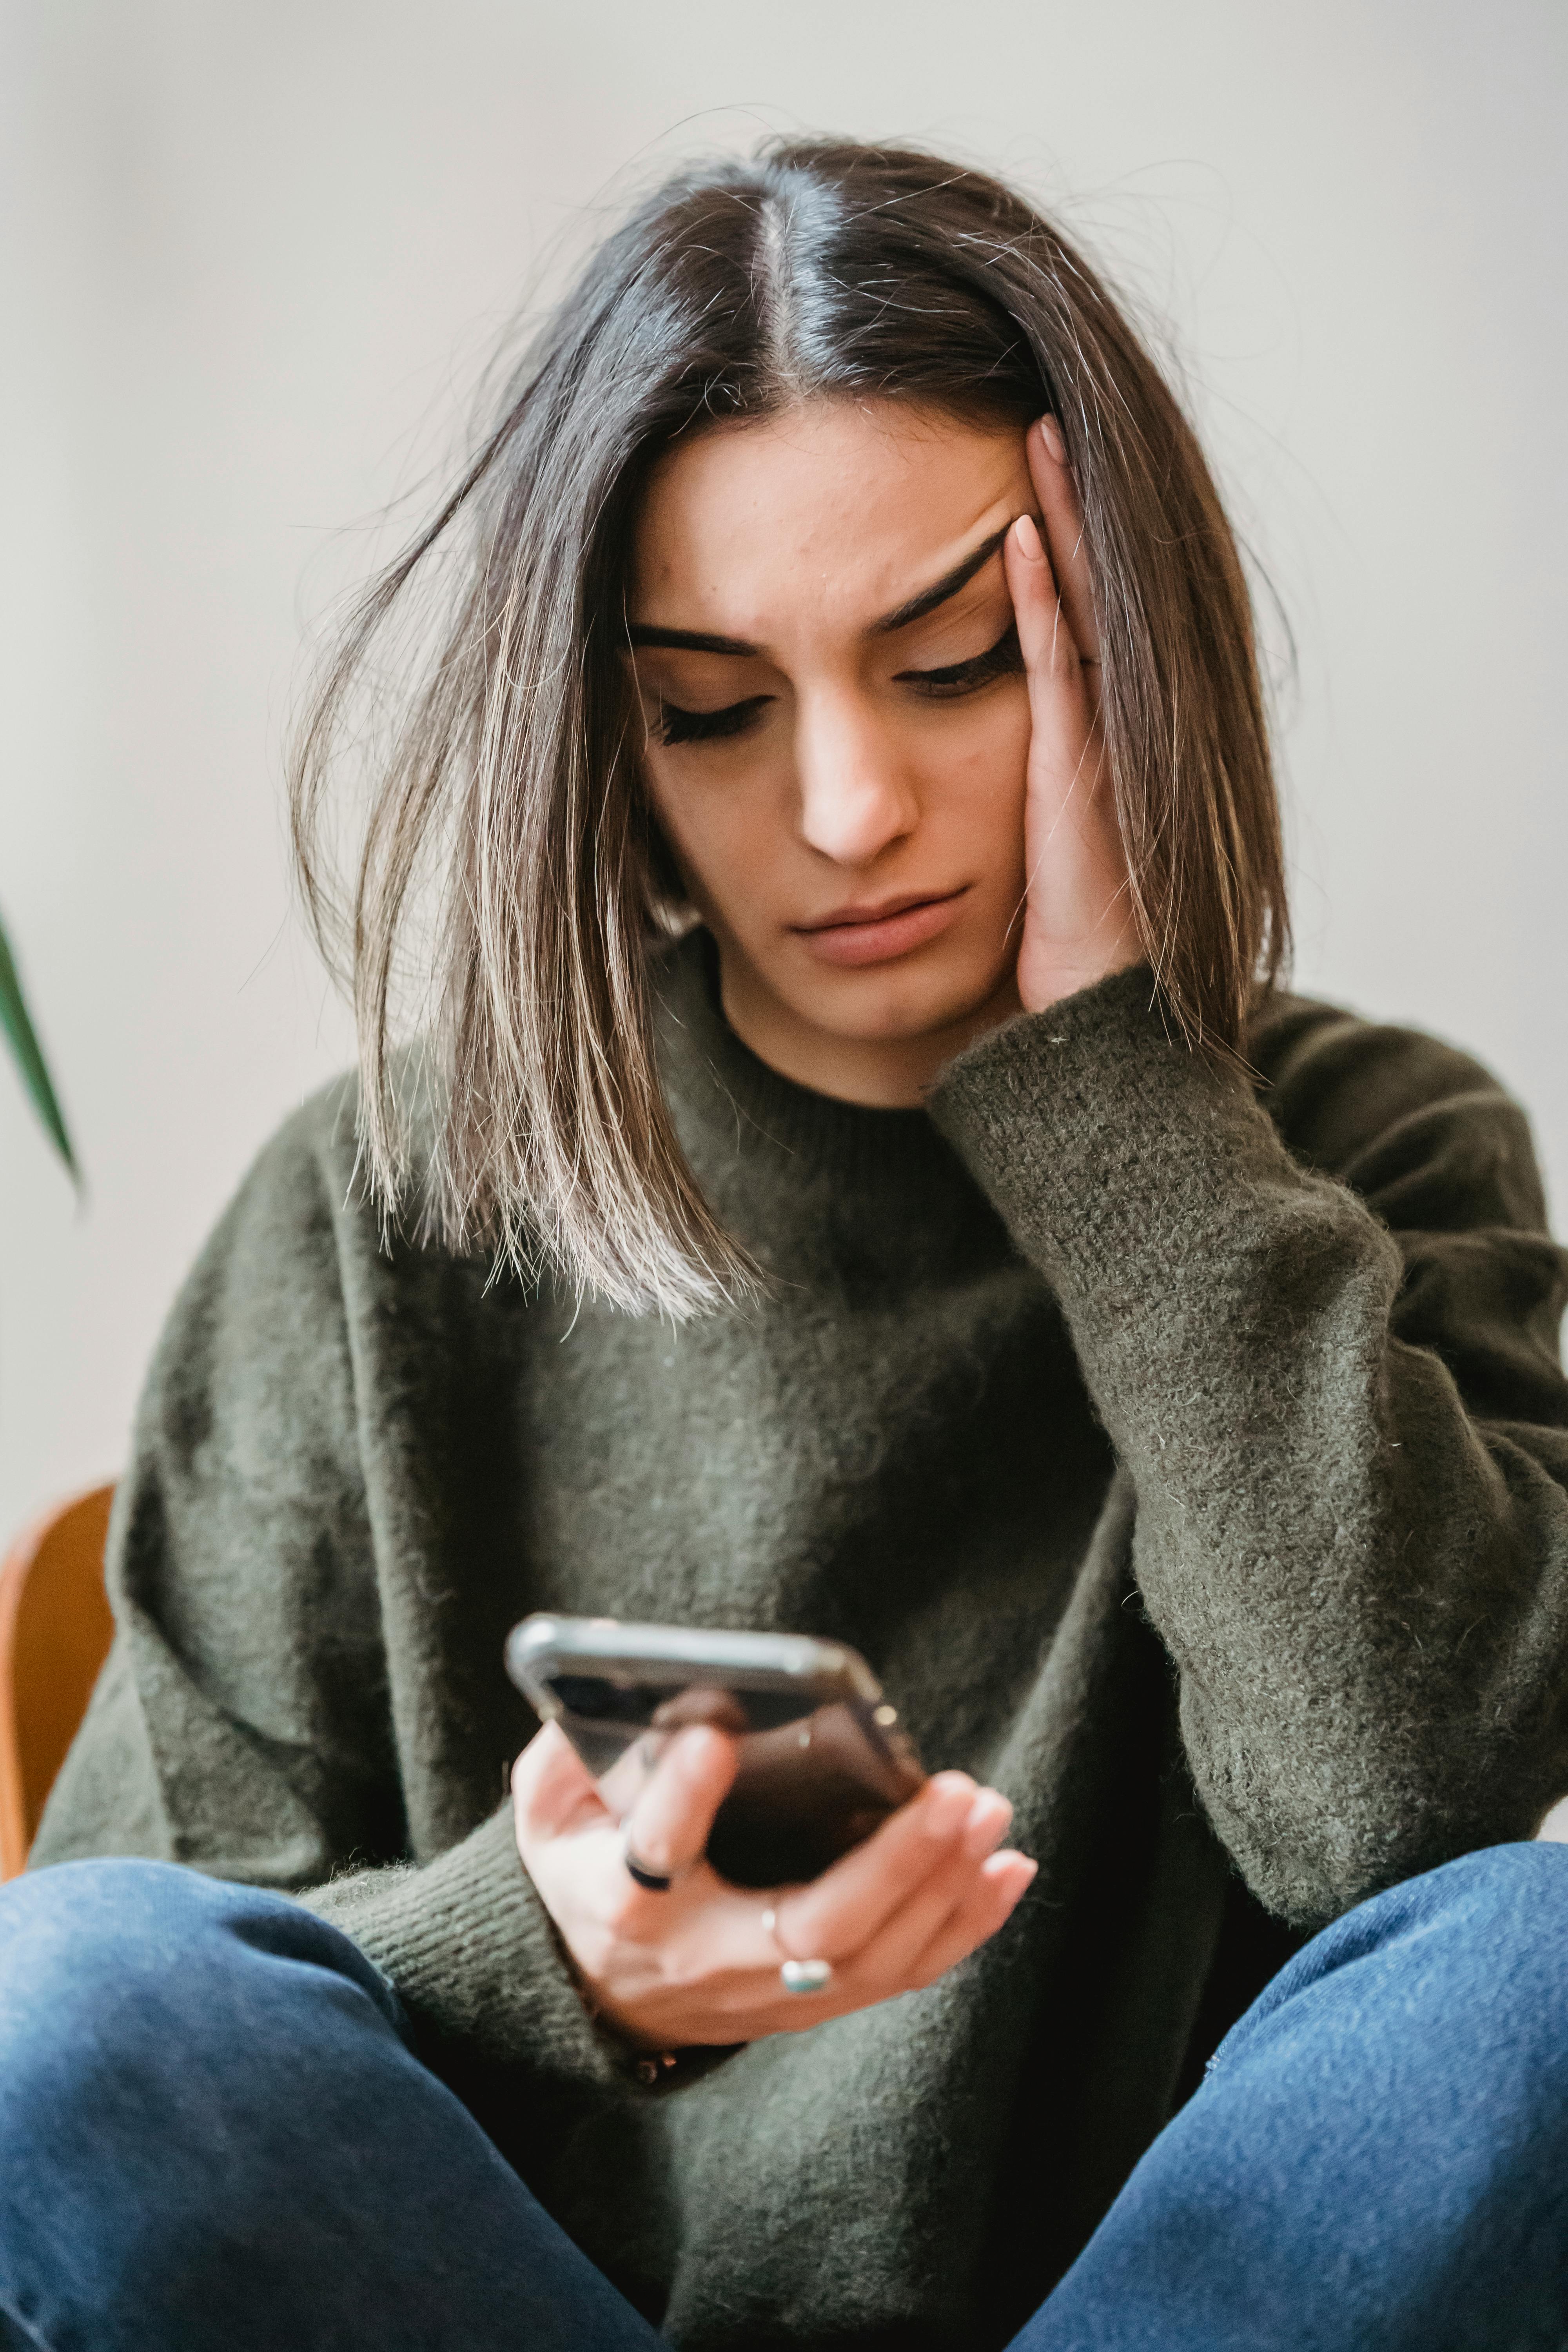 A woman looking at her phone reluctantly | Source: Pexels